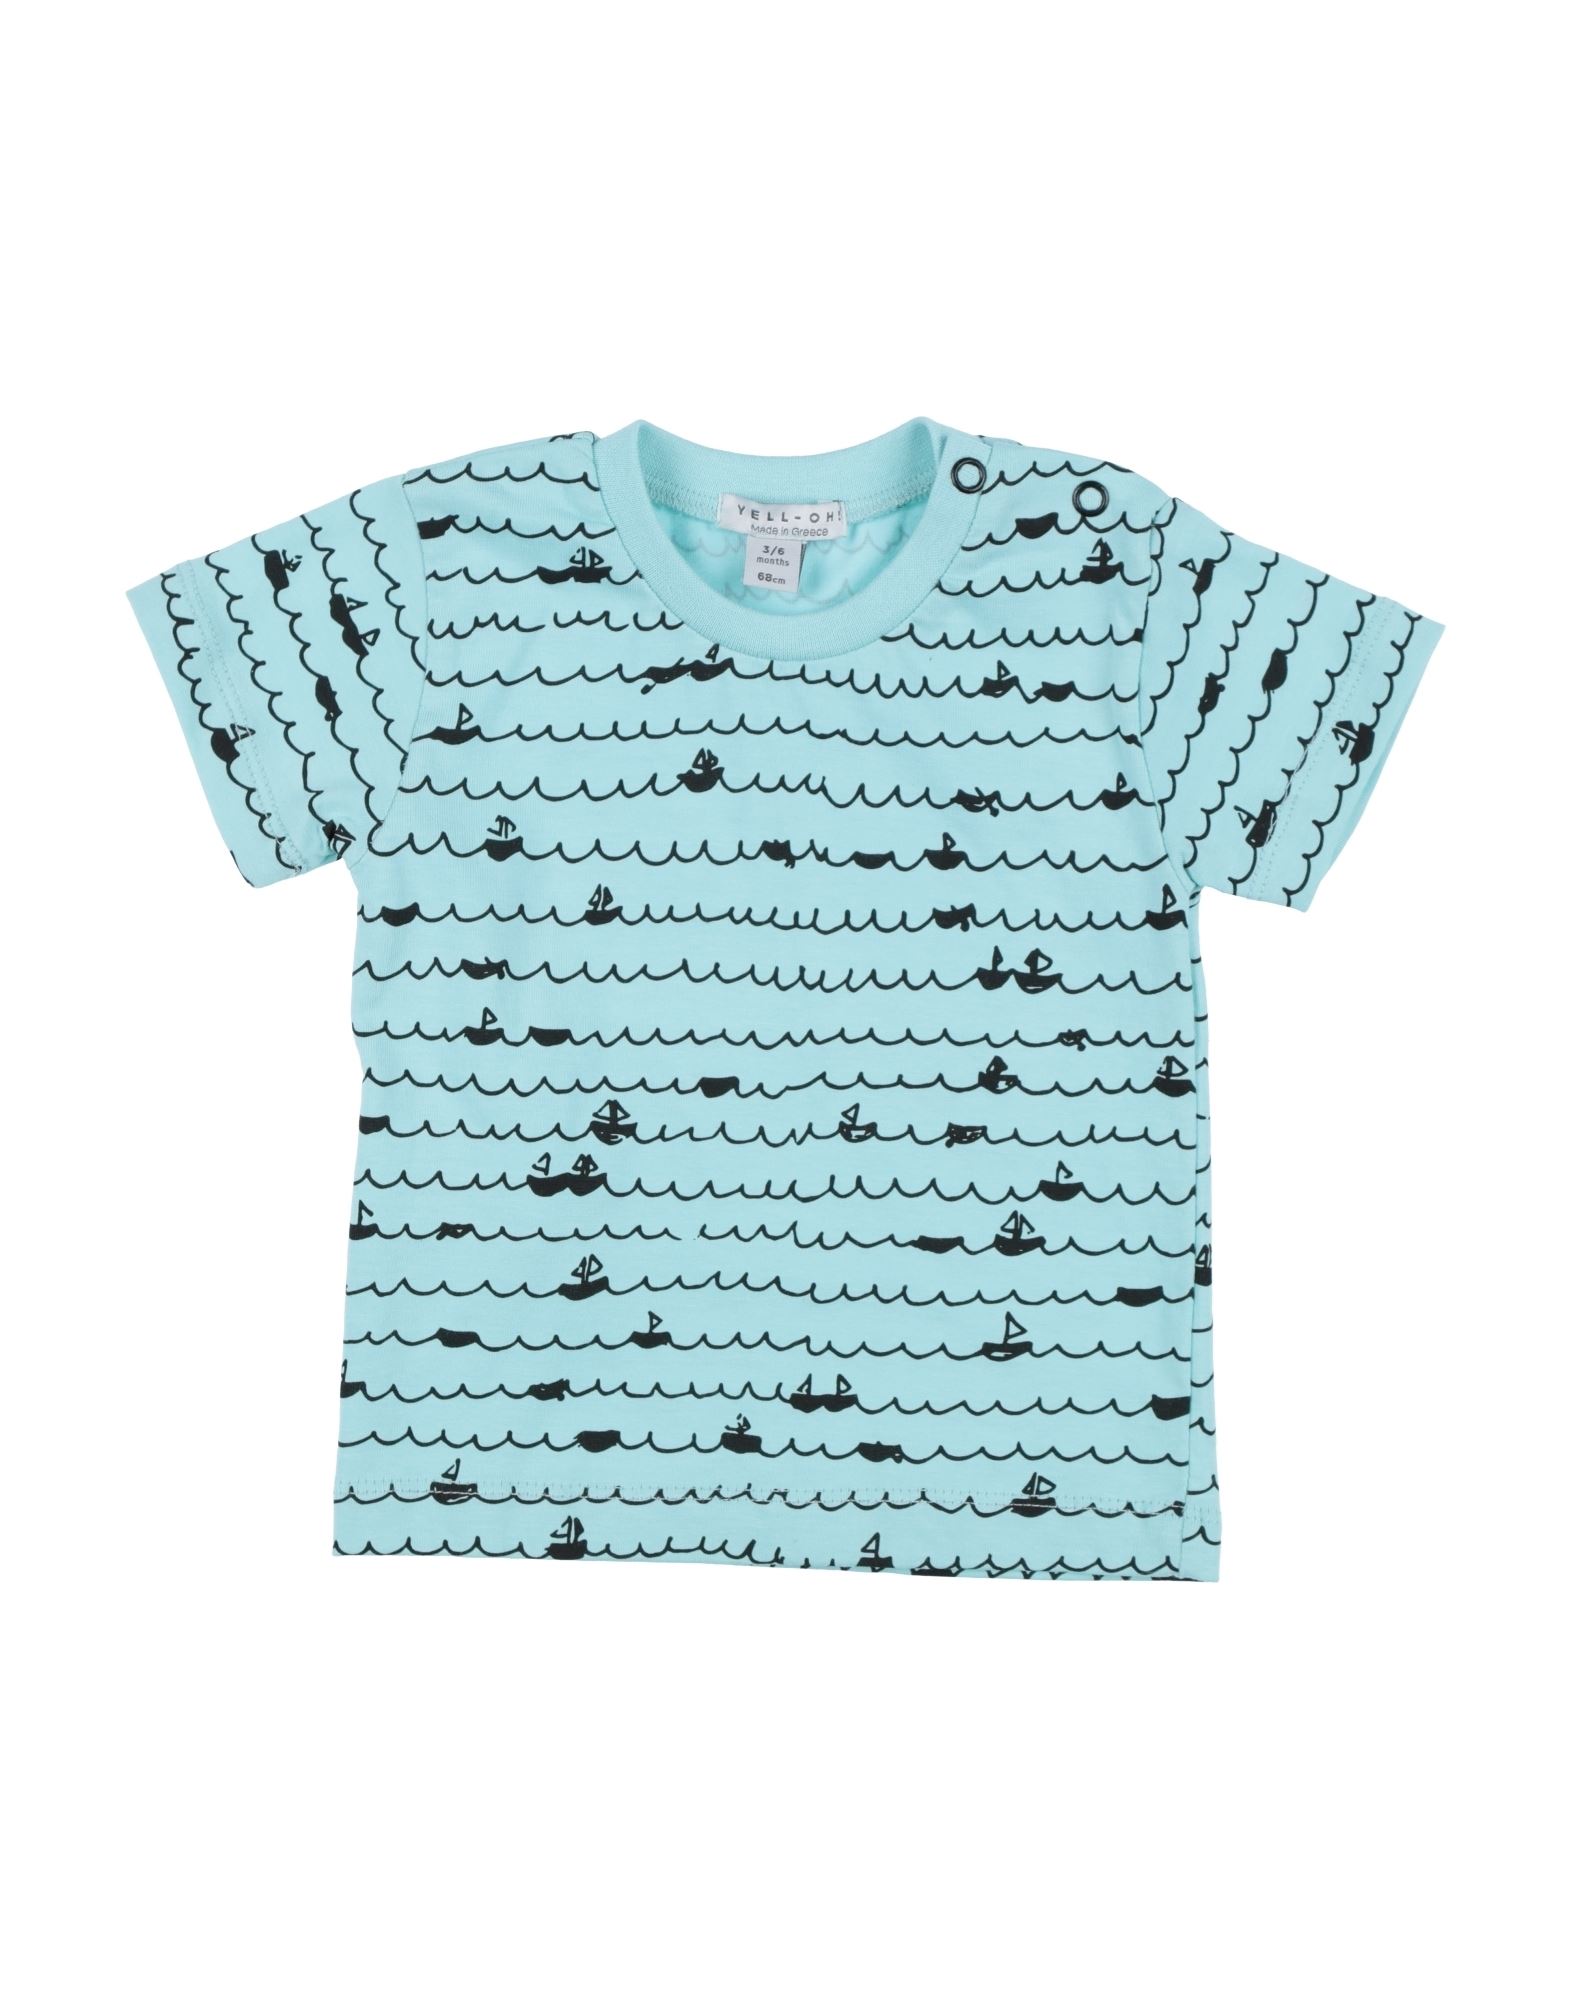 Yell-oh Kids' ! Newborn Girl T-shirt Turquoise Size 3 Cotton In Blue